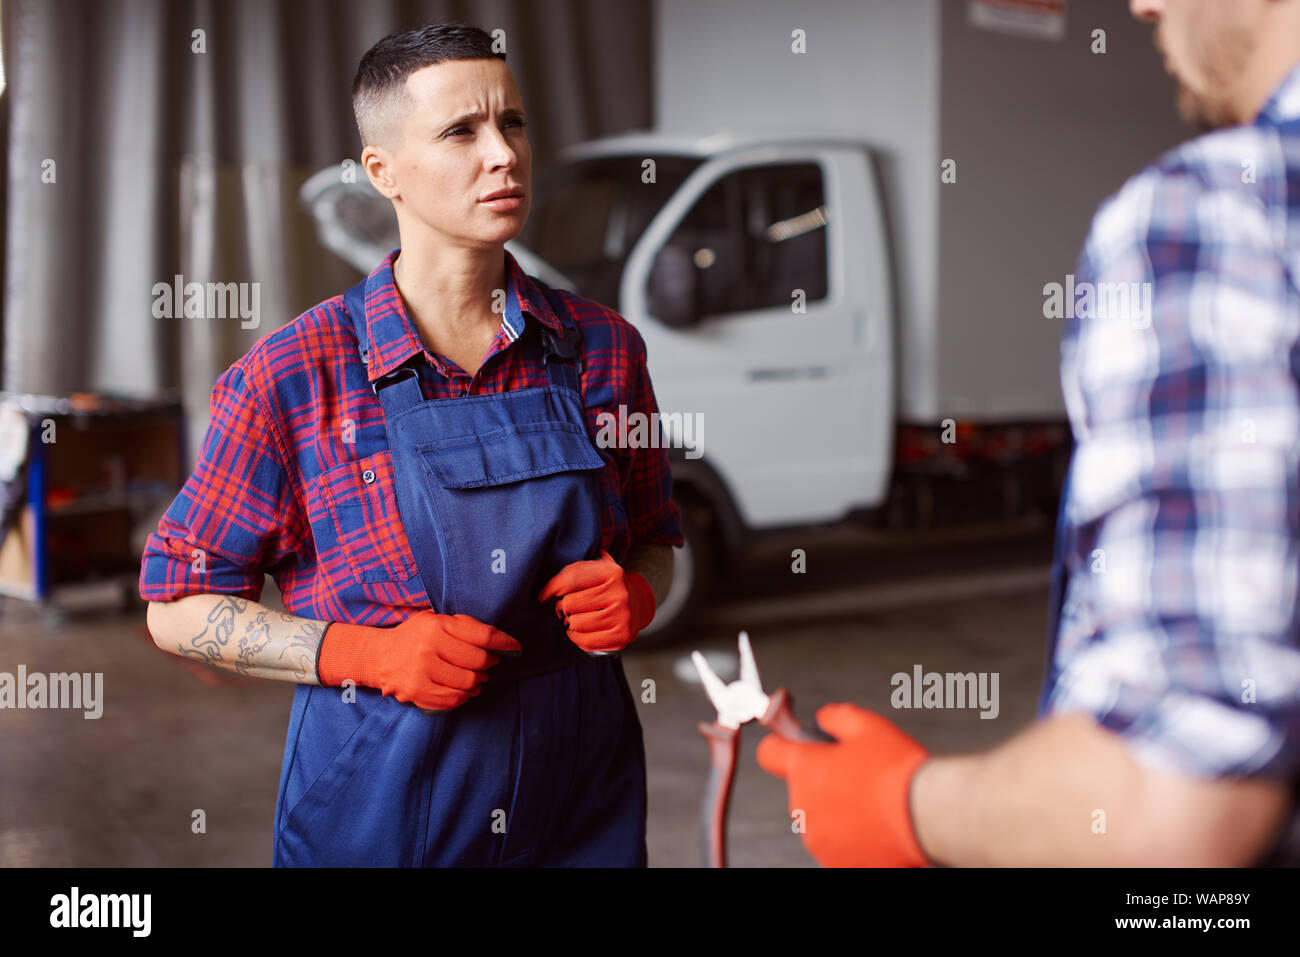 Female automechanic in the uniform listens to her mentor as he explains her what to do. Stock Photo